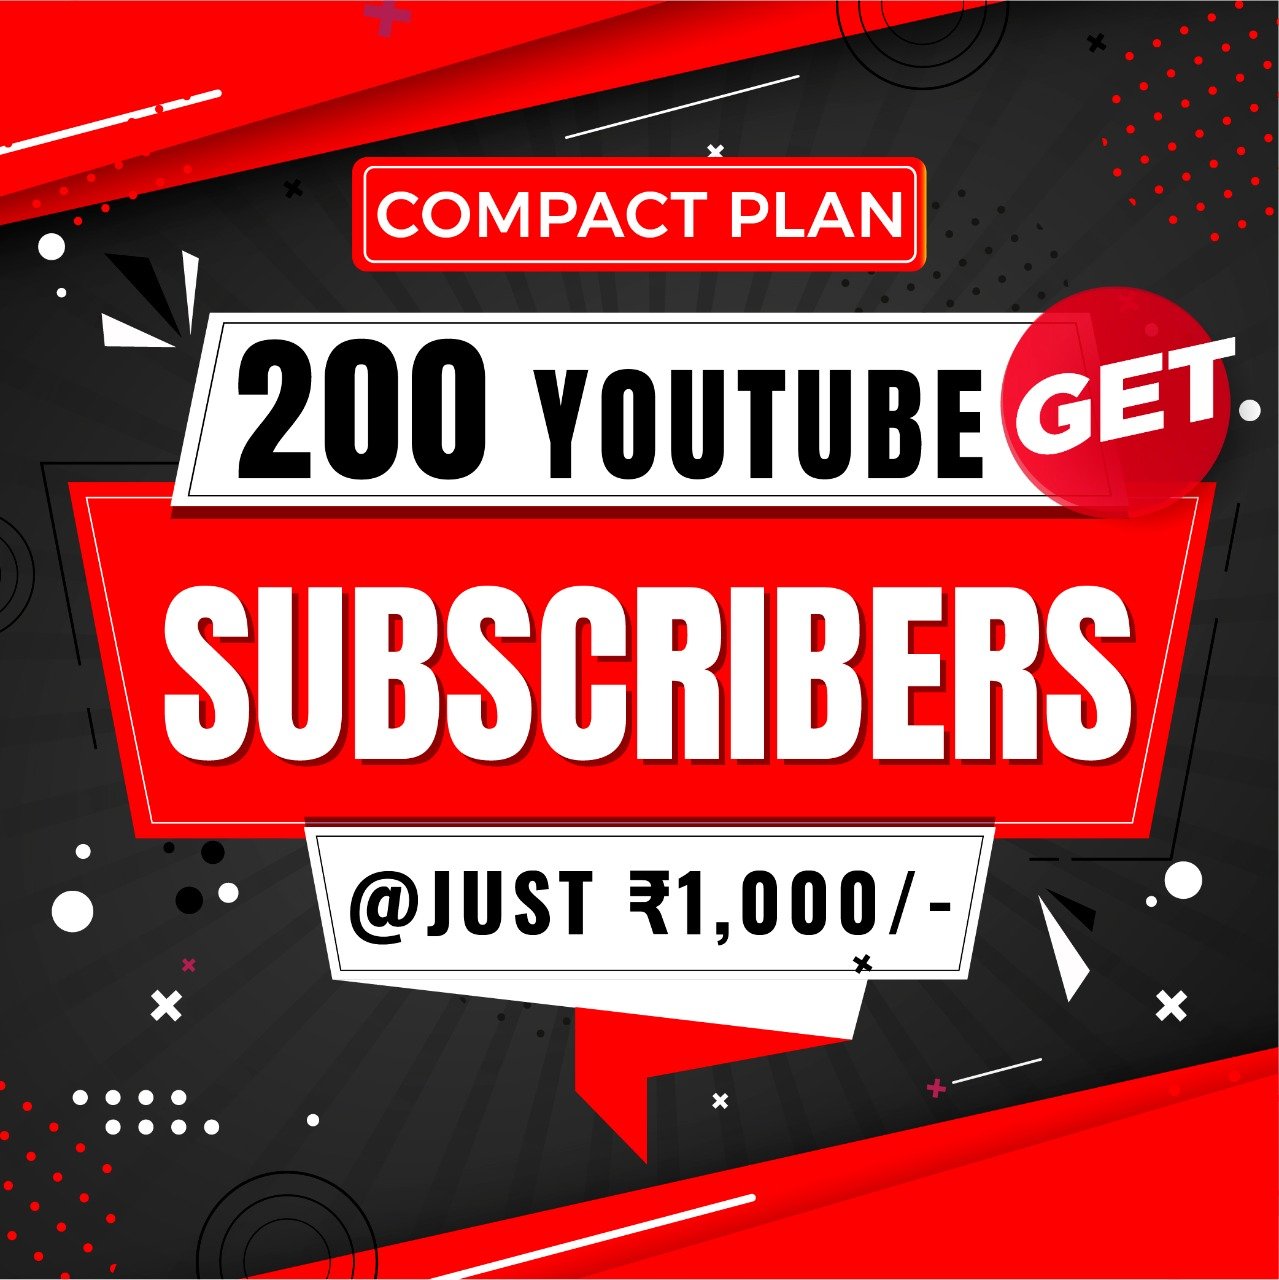 Get 200 Real YouTube Subscribers